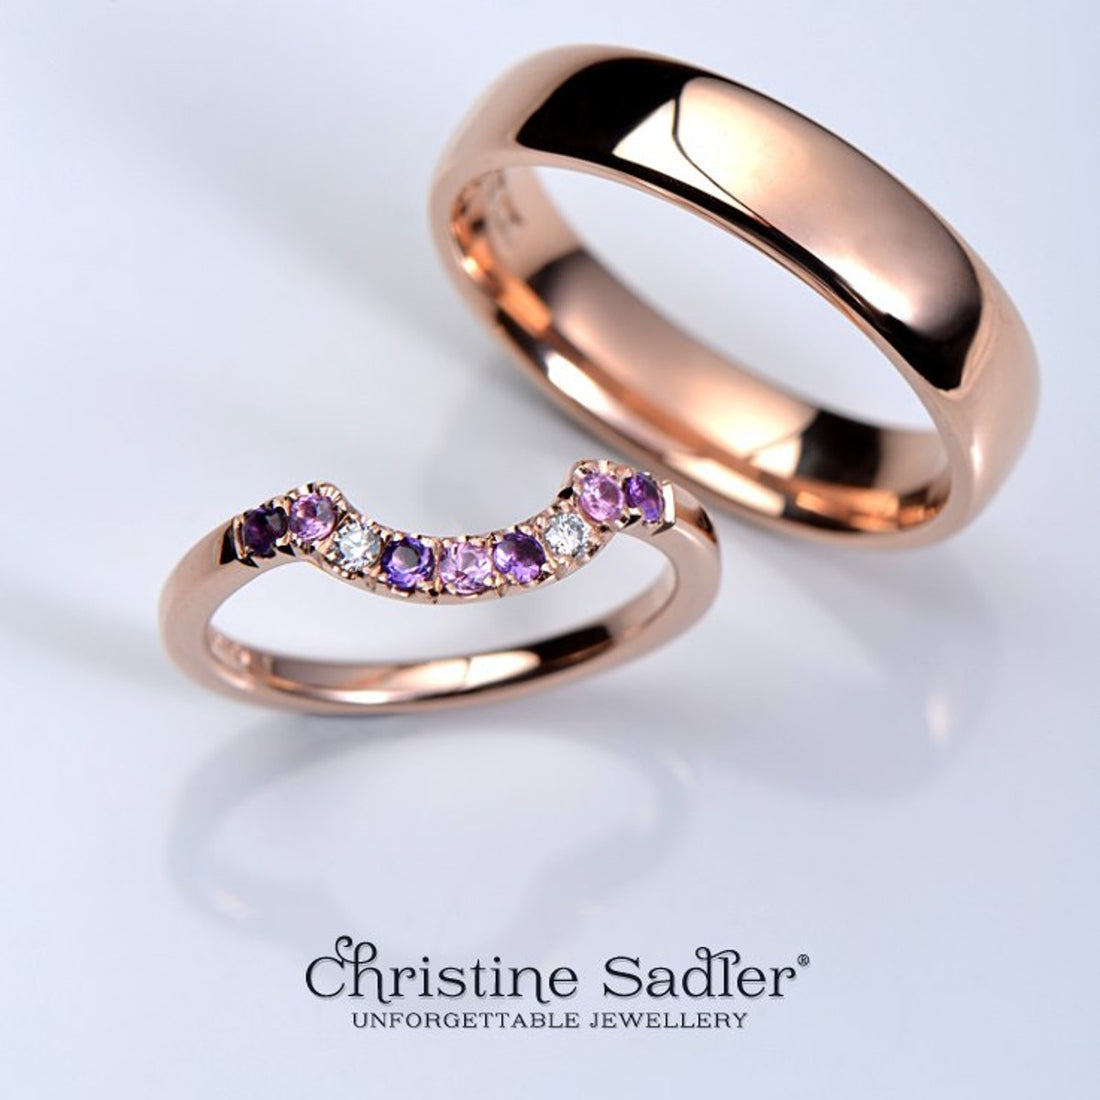 Add colour to your wedding rings to make them more personal.